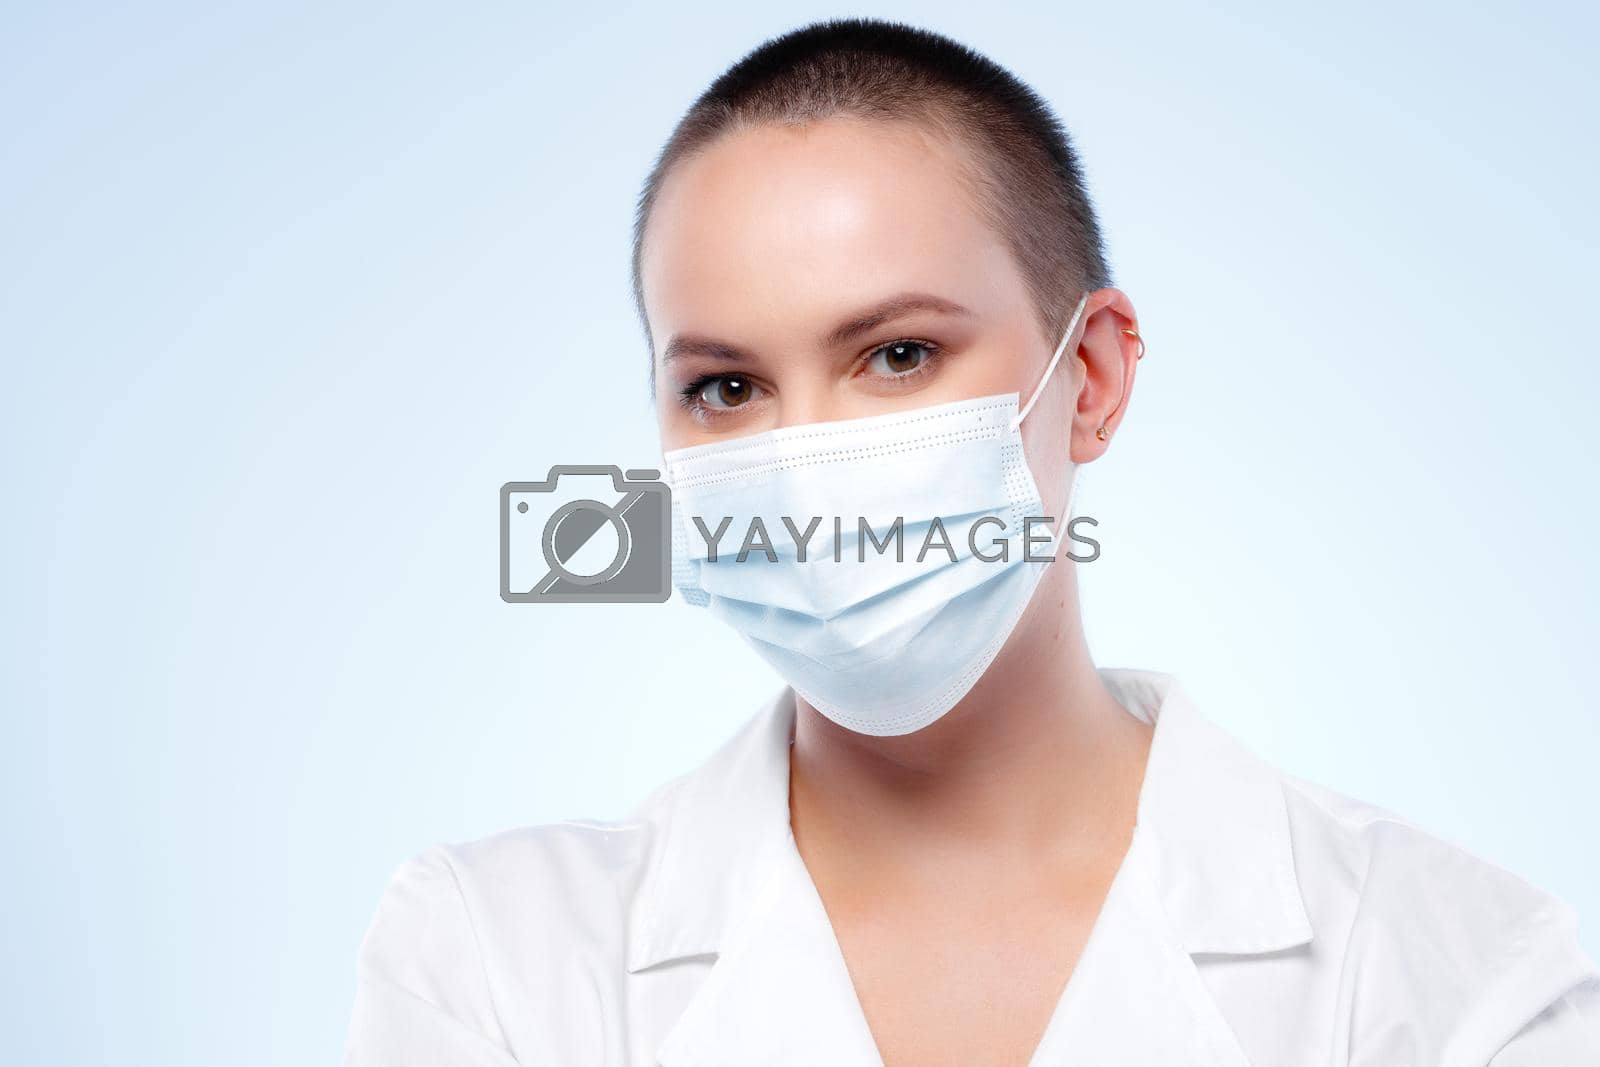 Royalty free image of Short-haired woman doctor in medical gown wearing face mask by Fabrikasimf